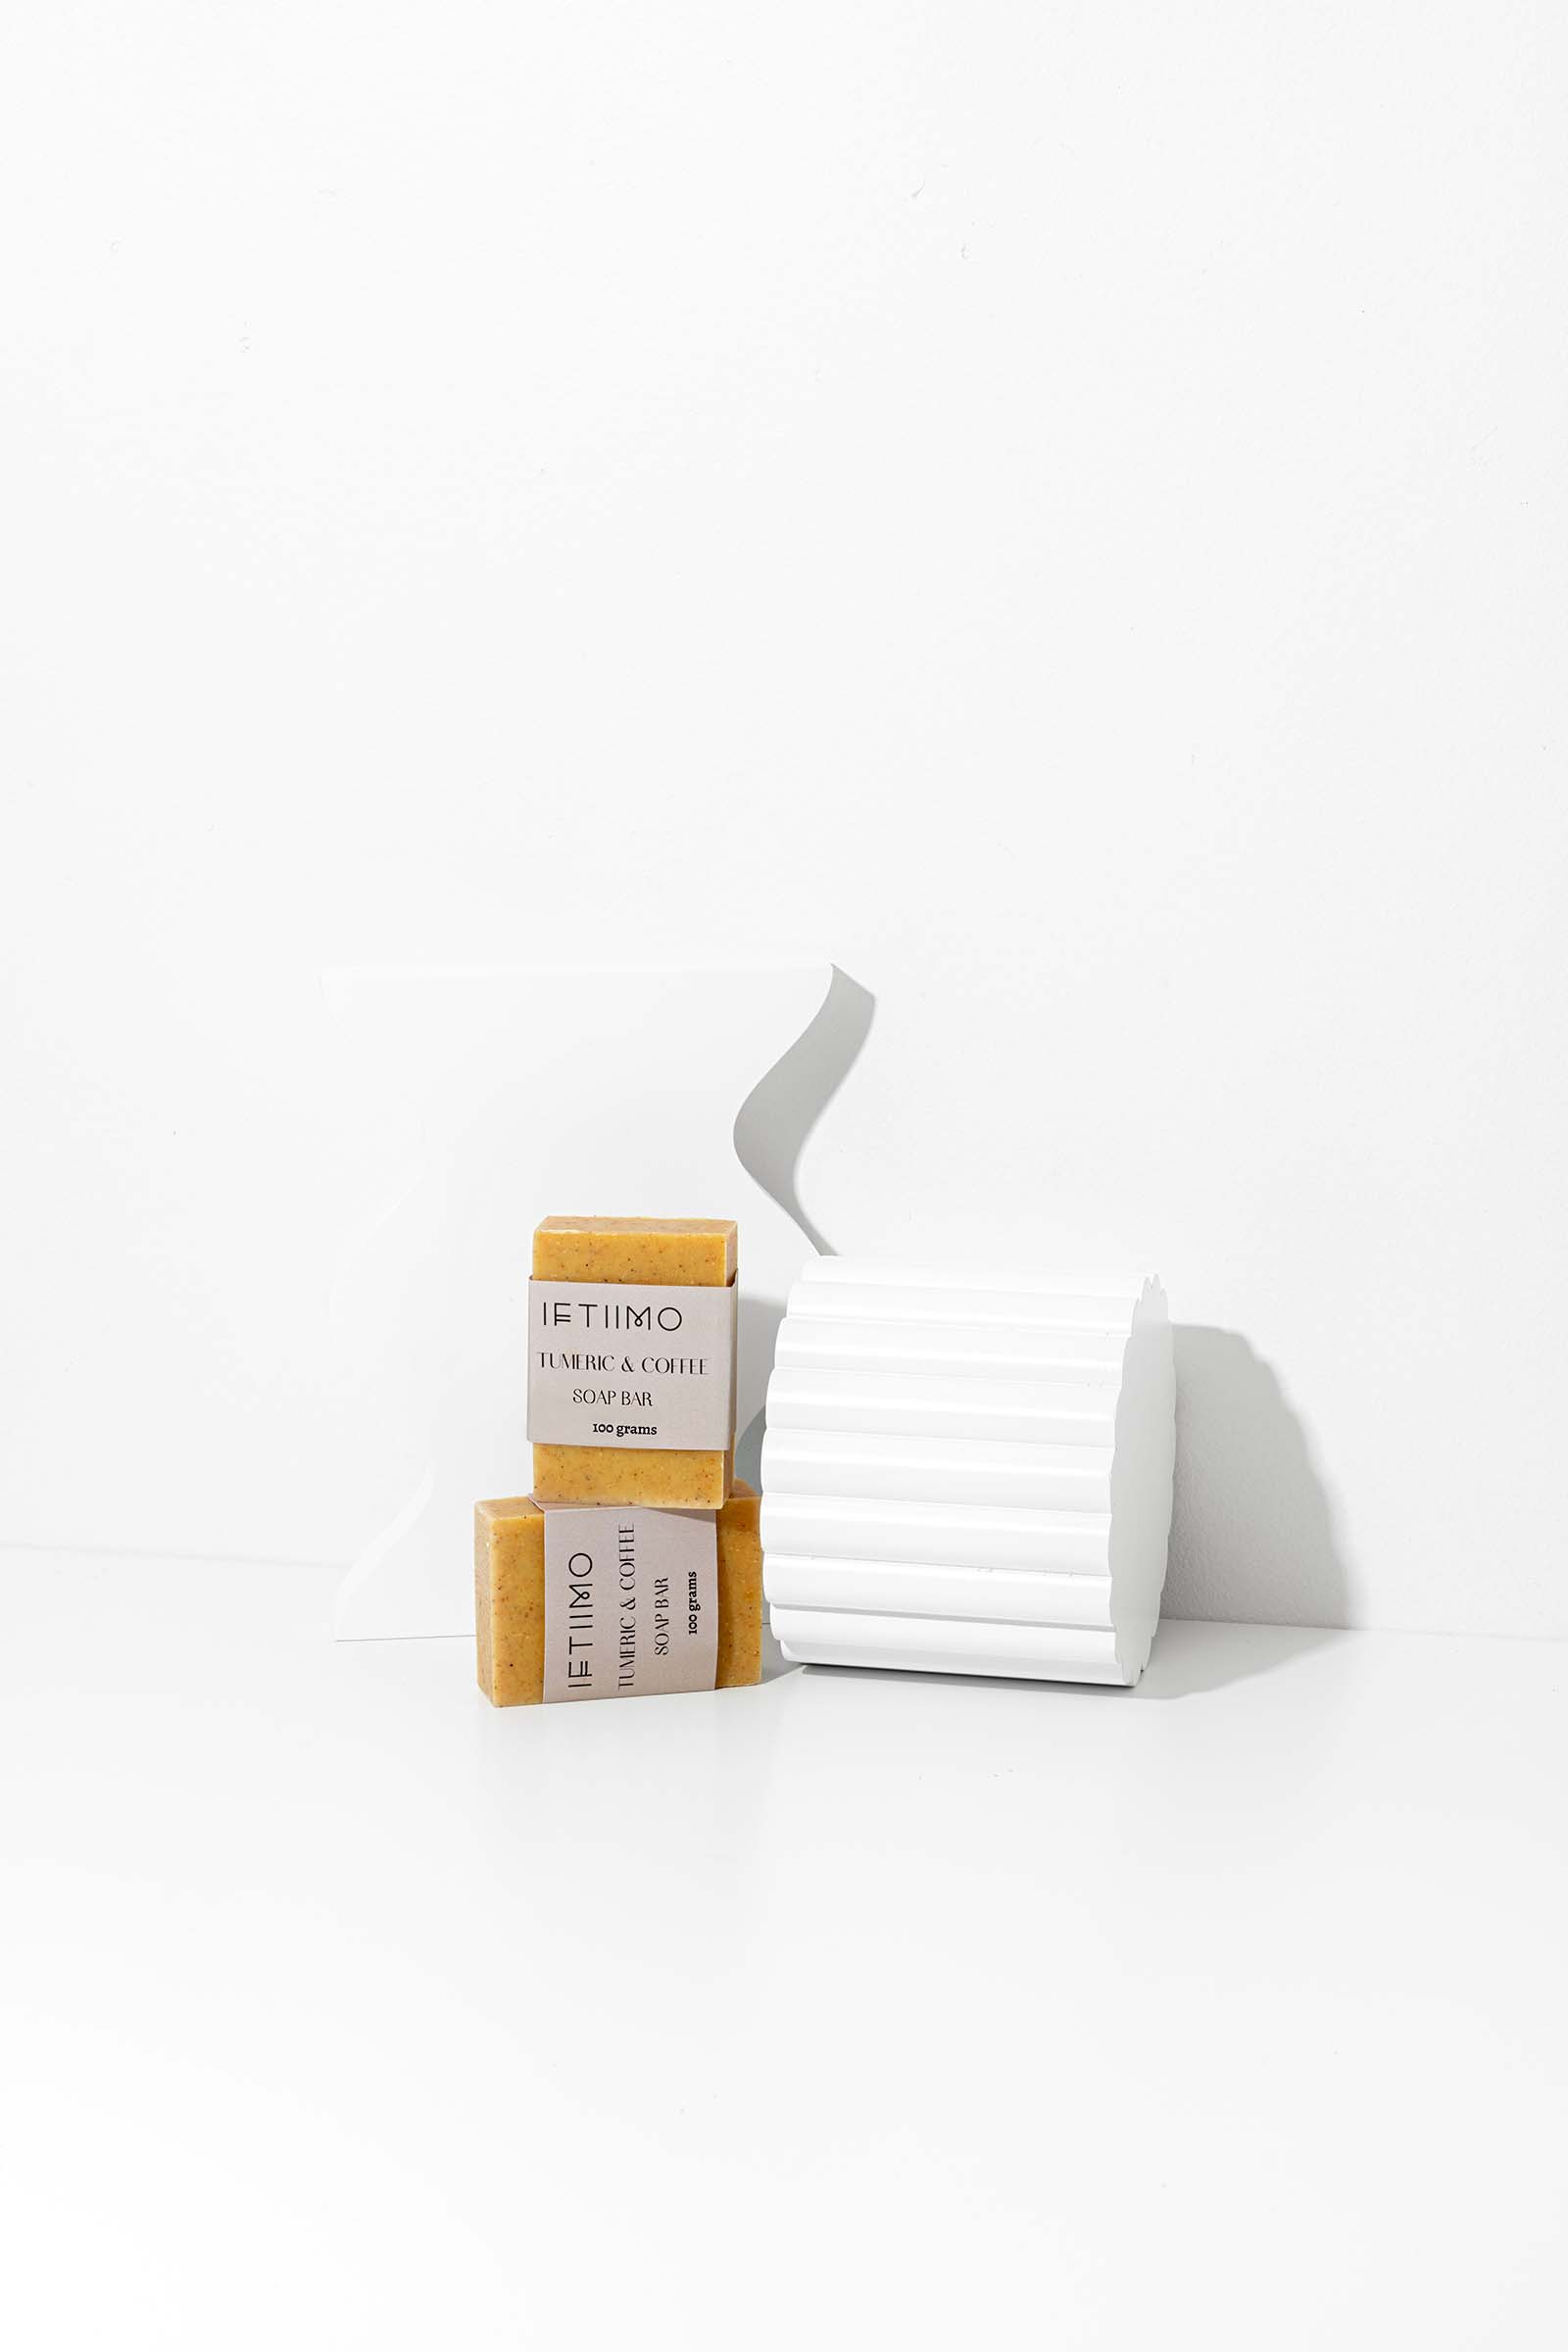 Plain White Styled Product Photos for a Skincare Brand. Styled Product Still by Colourpop Studio